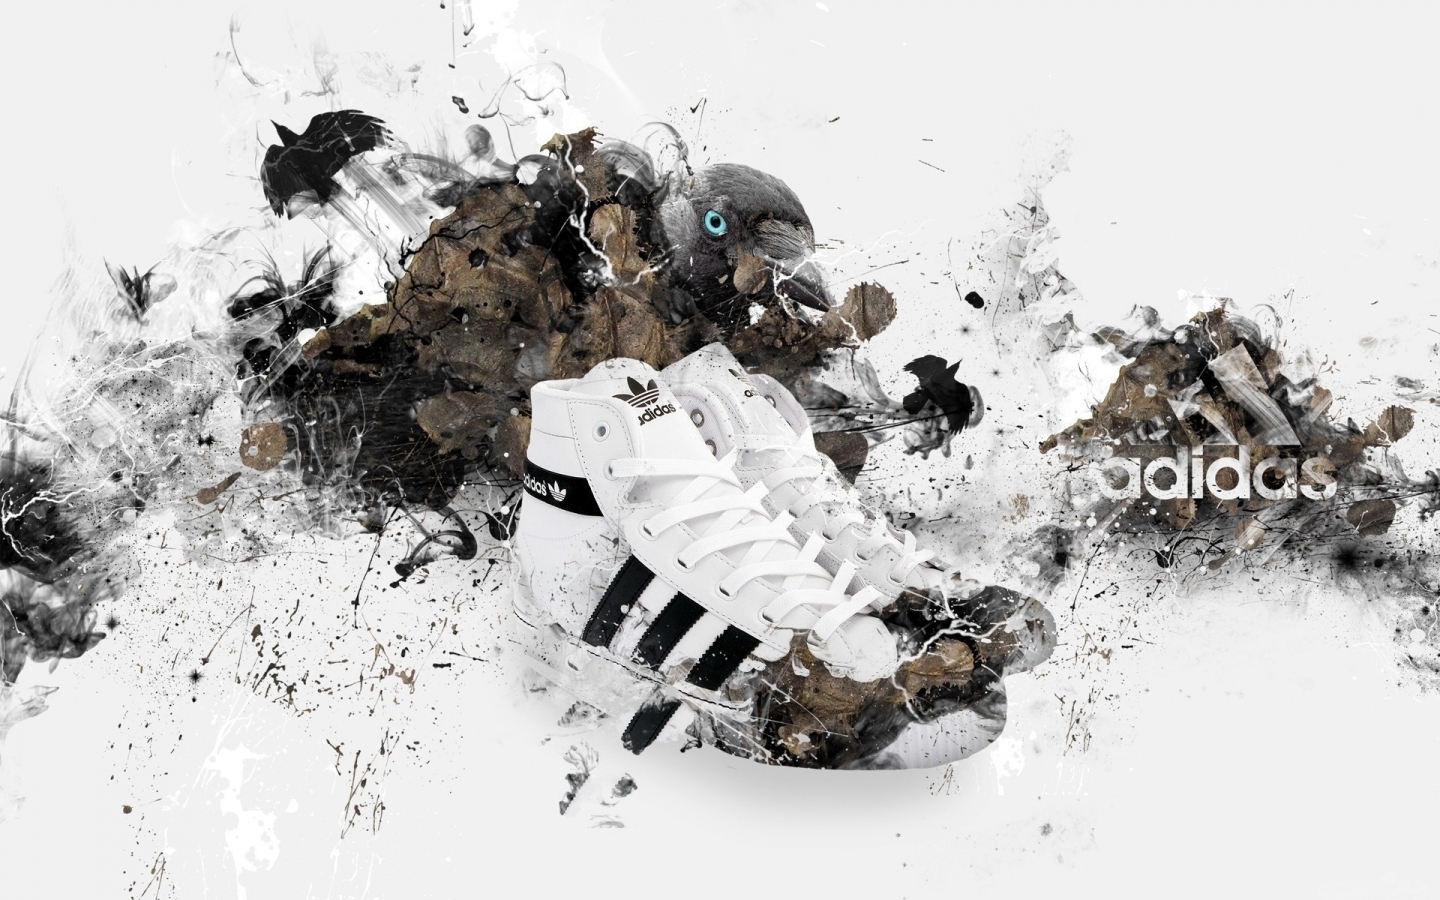 Adidas Shoes for 1440 x 900 widescreen resolution